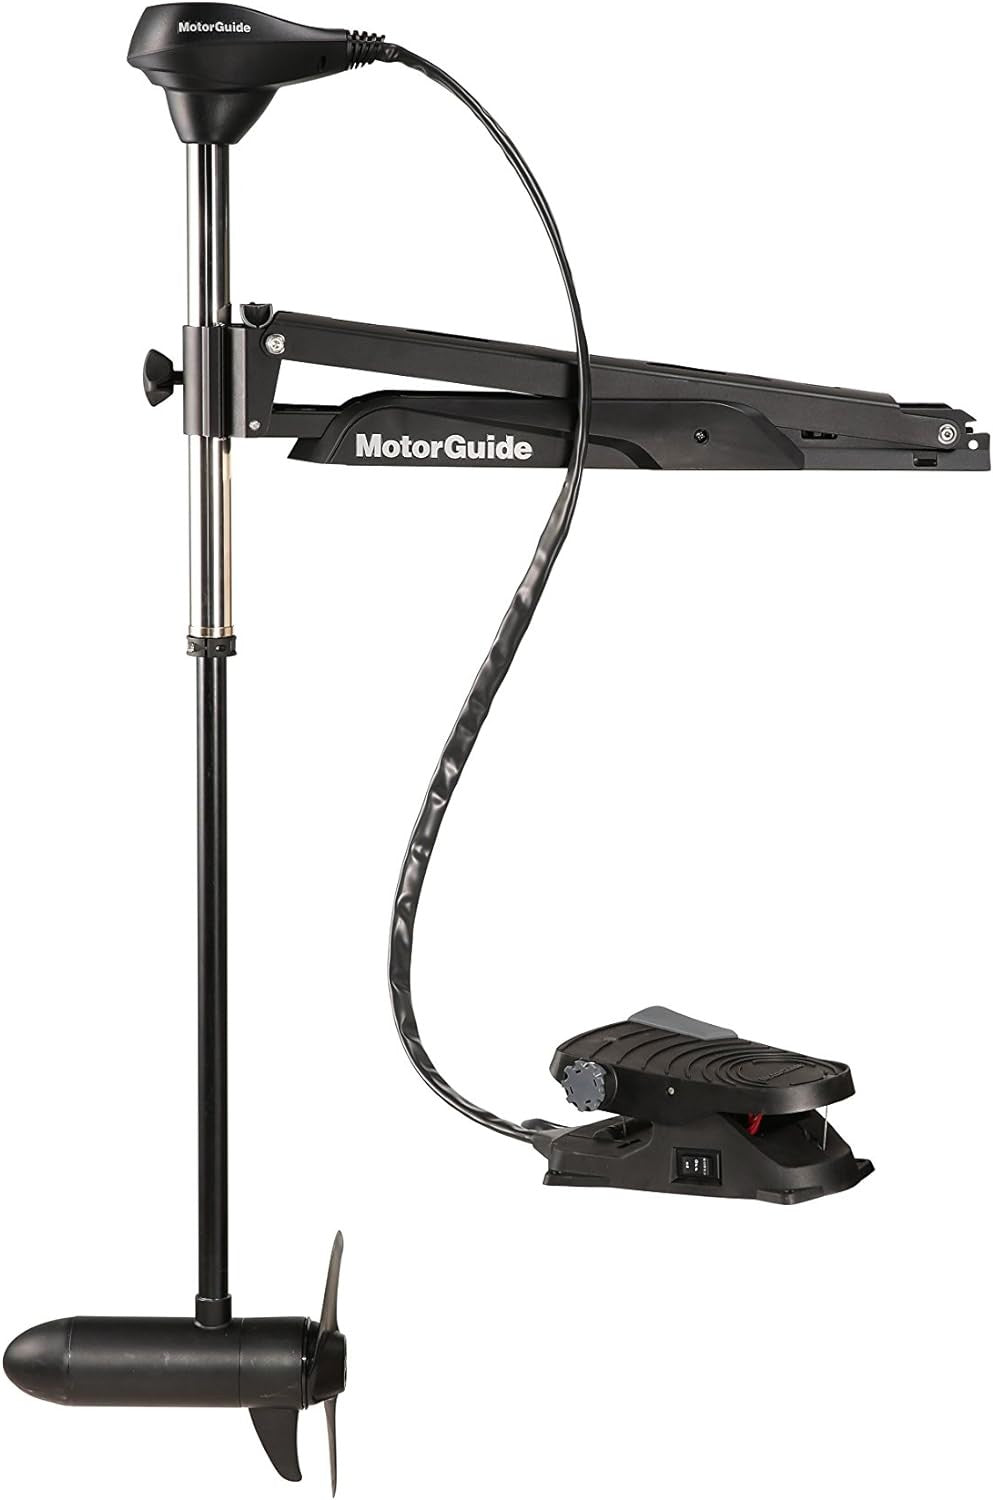 MotorGuide X3- 70lbs-45"-24V Freshwater Bow Mount Trolling Motor w/ Foot Control